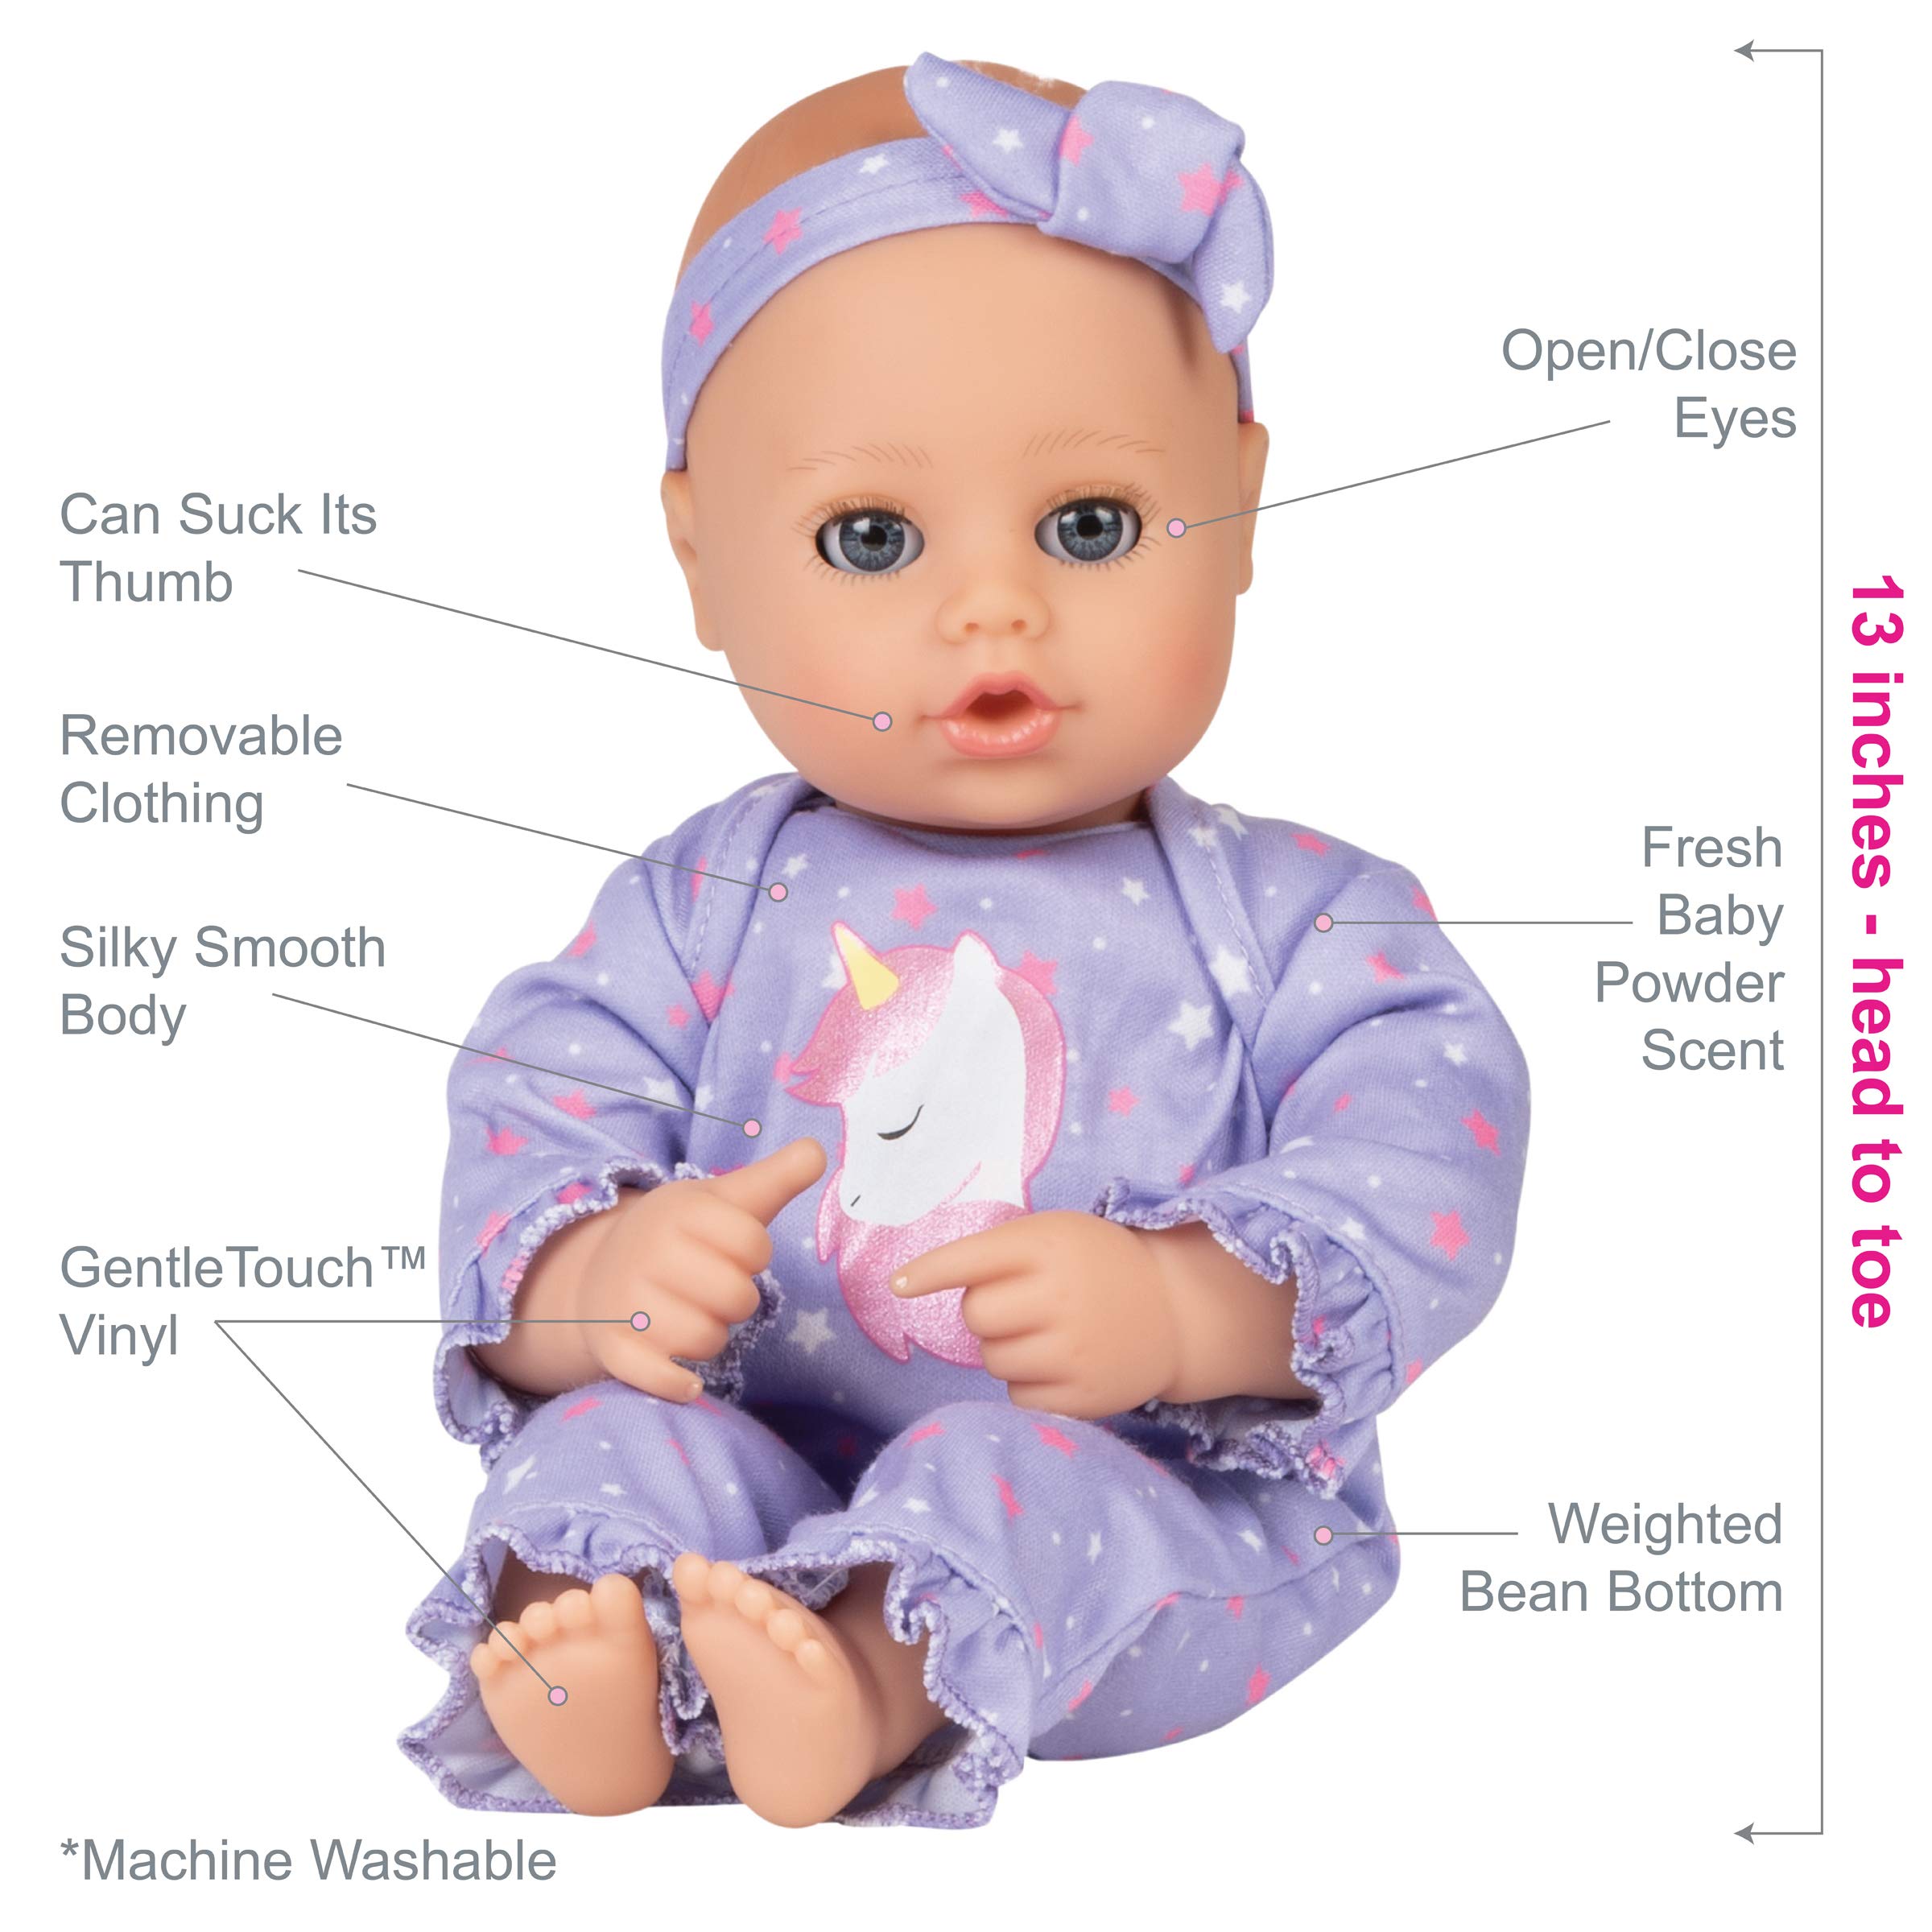 Adora Playtime Baby Doll Unicorn Glitter, 13 inch Soft Doll, Open/Close Eyes, Best Baby Girl Gift for Age 1+